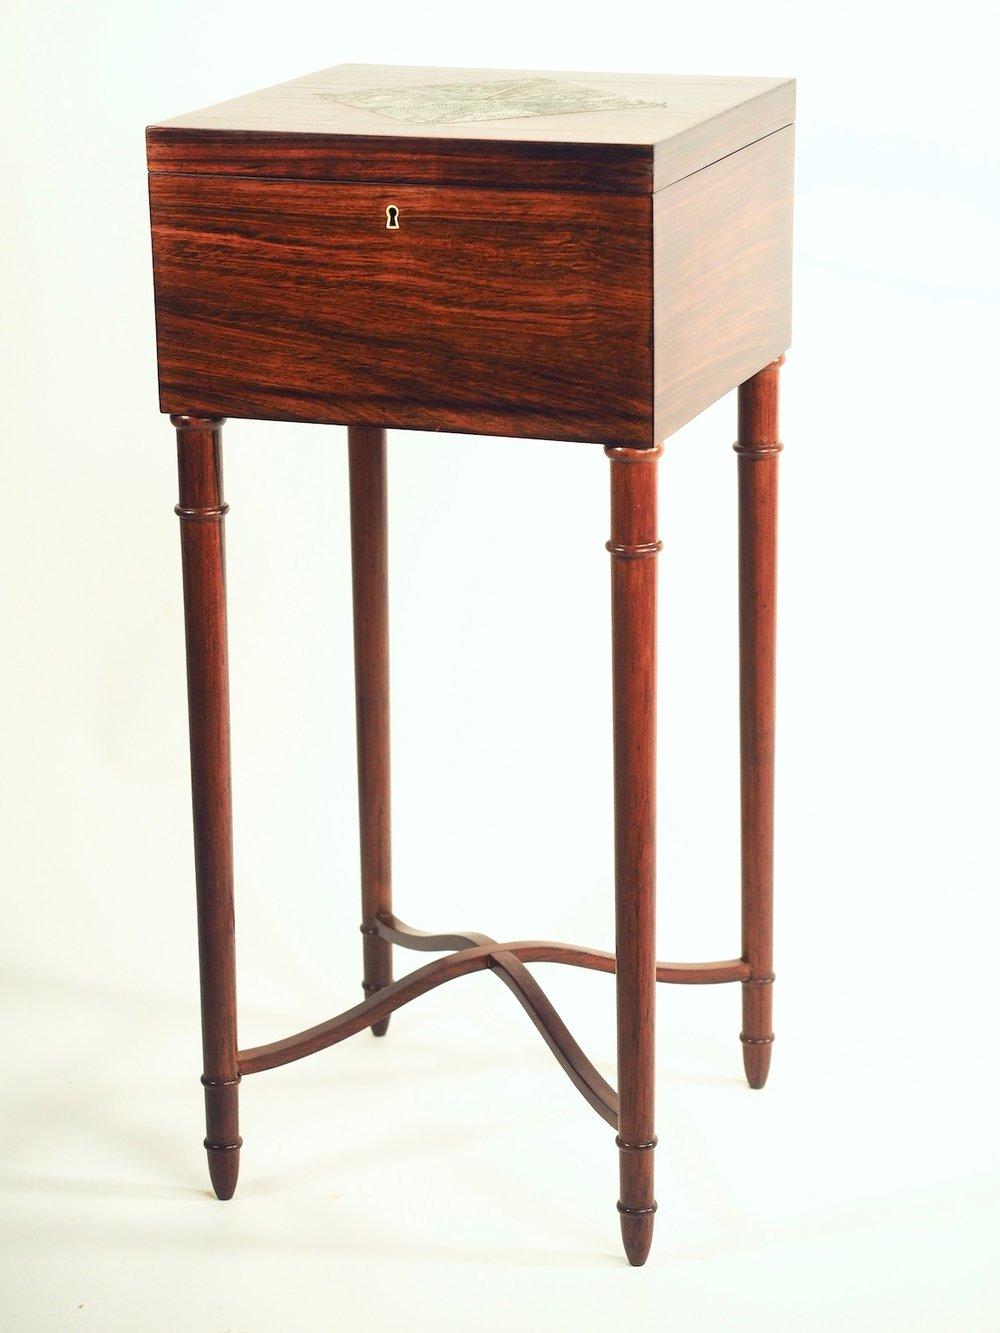 Classic early French Art Deco side table with lift top, circa 1920, by Leon Jallot in rosewood with shagreen inlaid top. Restored and refinished.

 